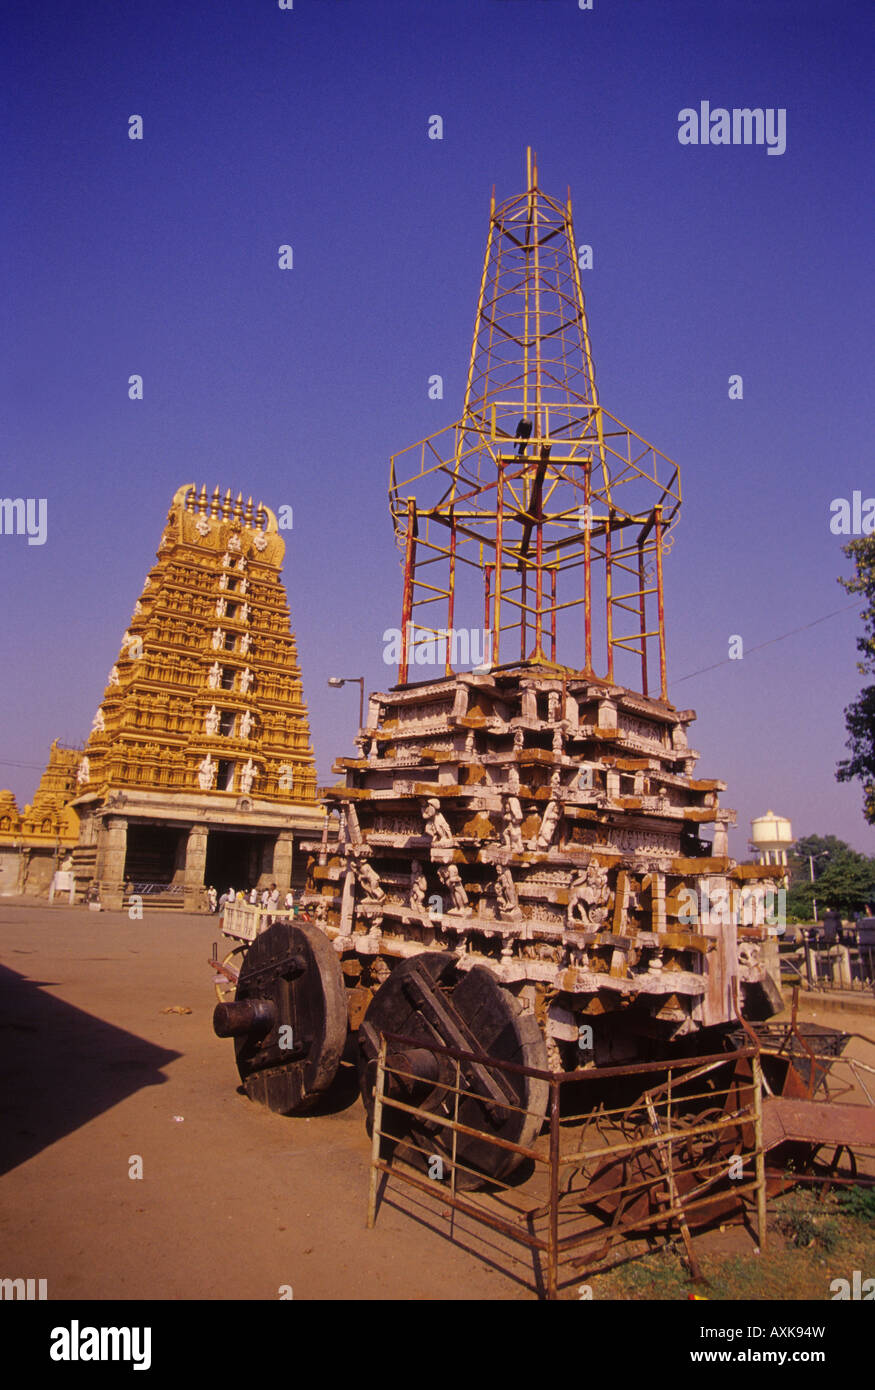 A temple chariot stands outside of the Nanjundeswara Temple in the Karnatakan town of Nanjangud. Stock Photo